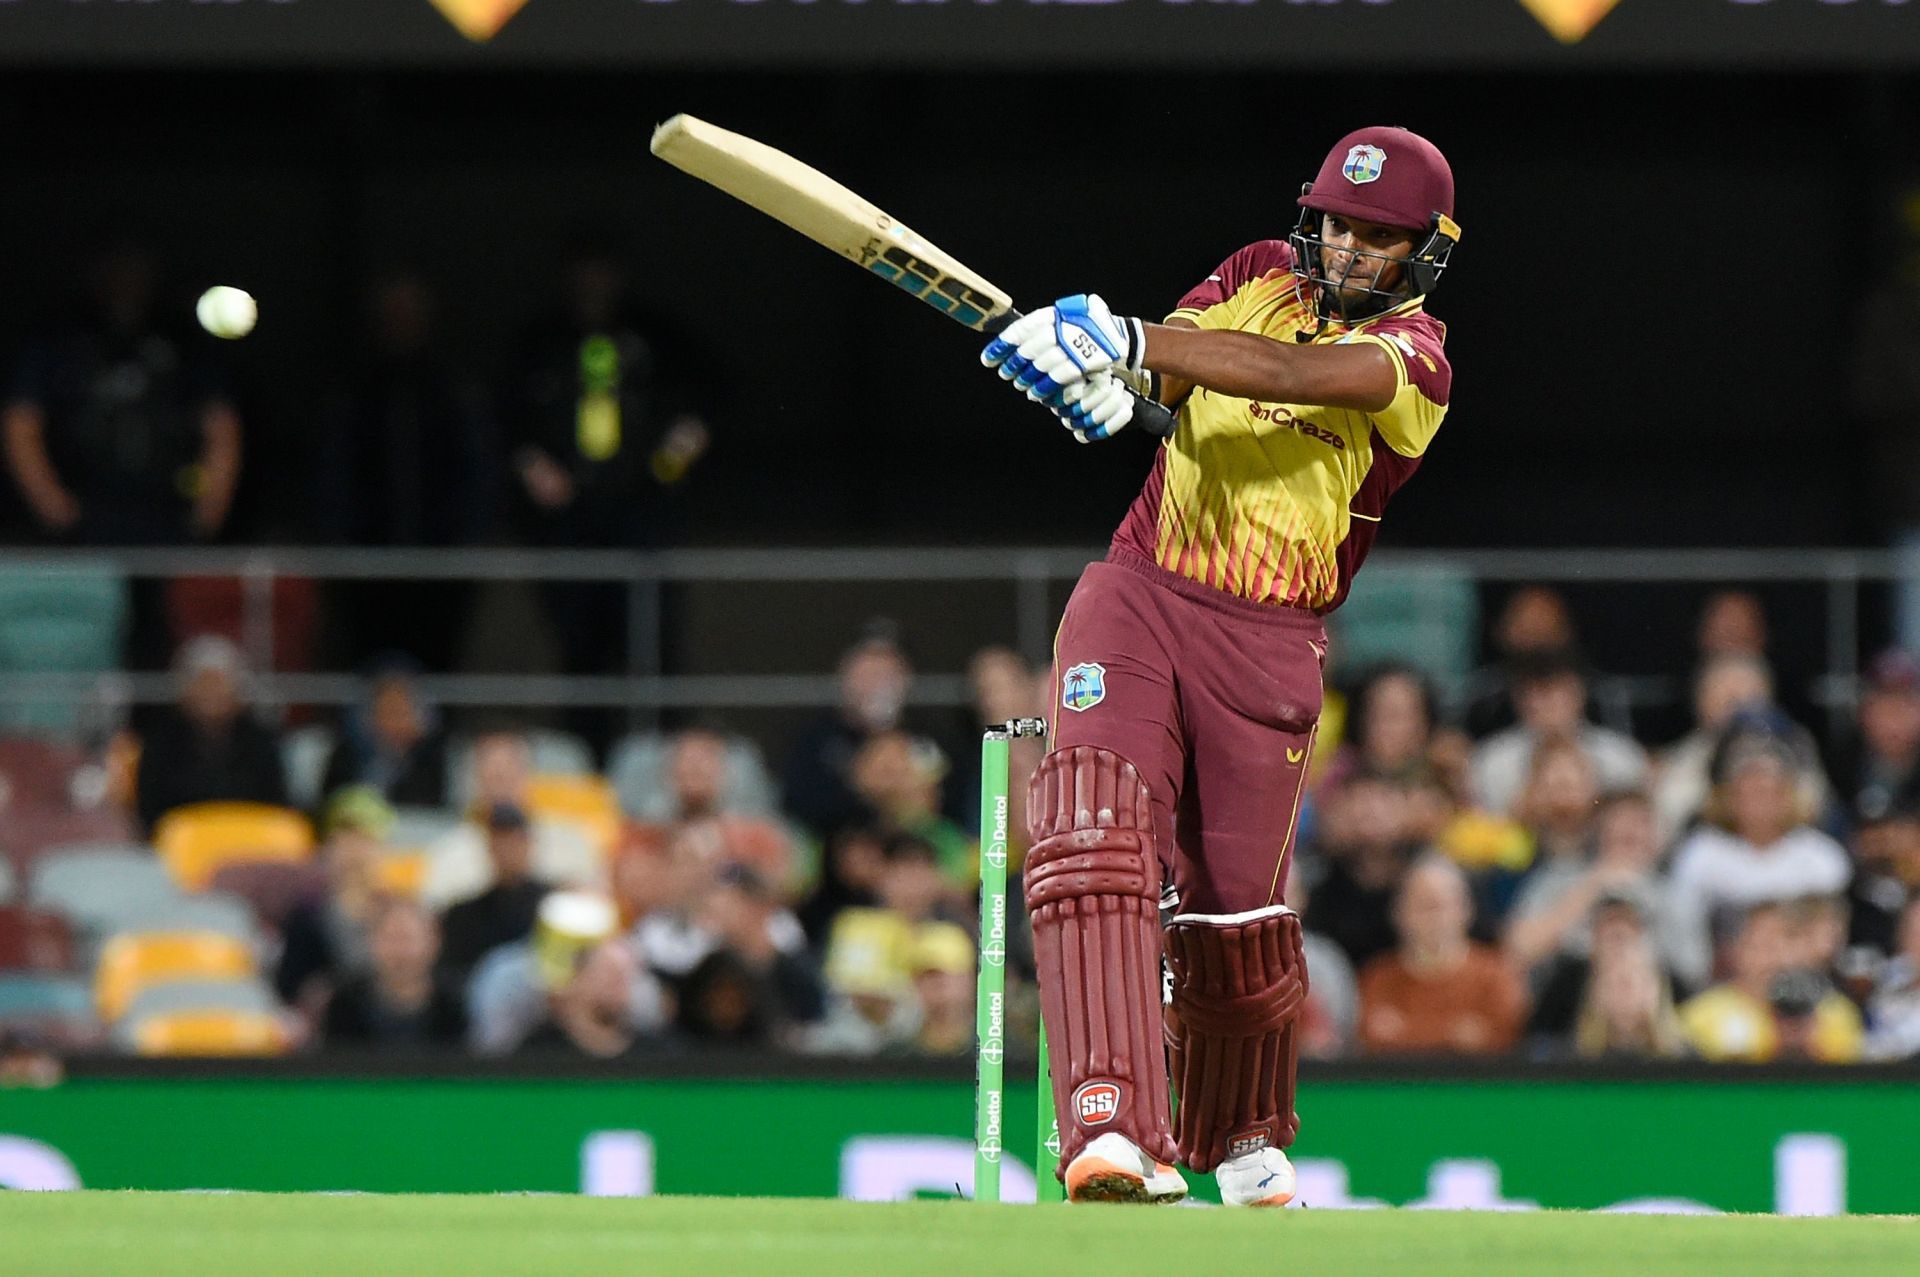 Australia v West Indies - T20I Series: Game 2 (Image: Getty)